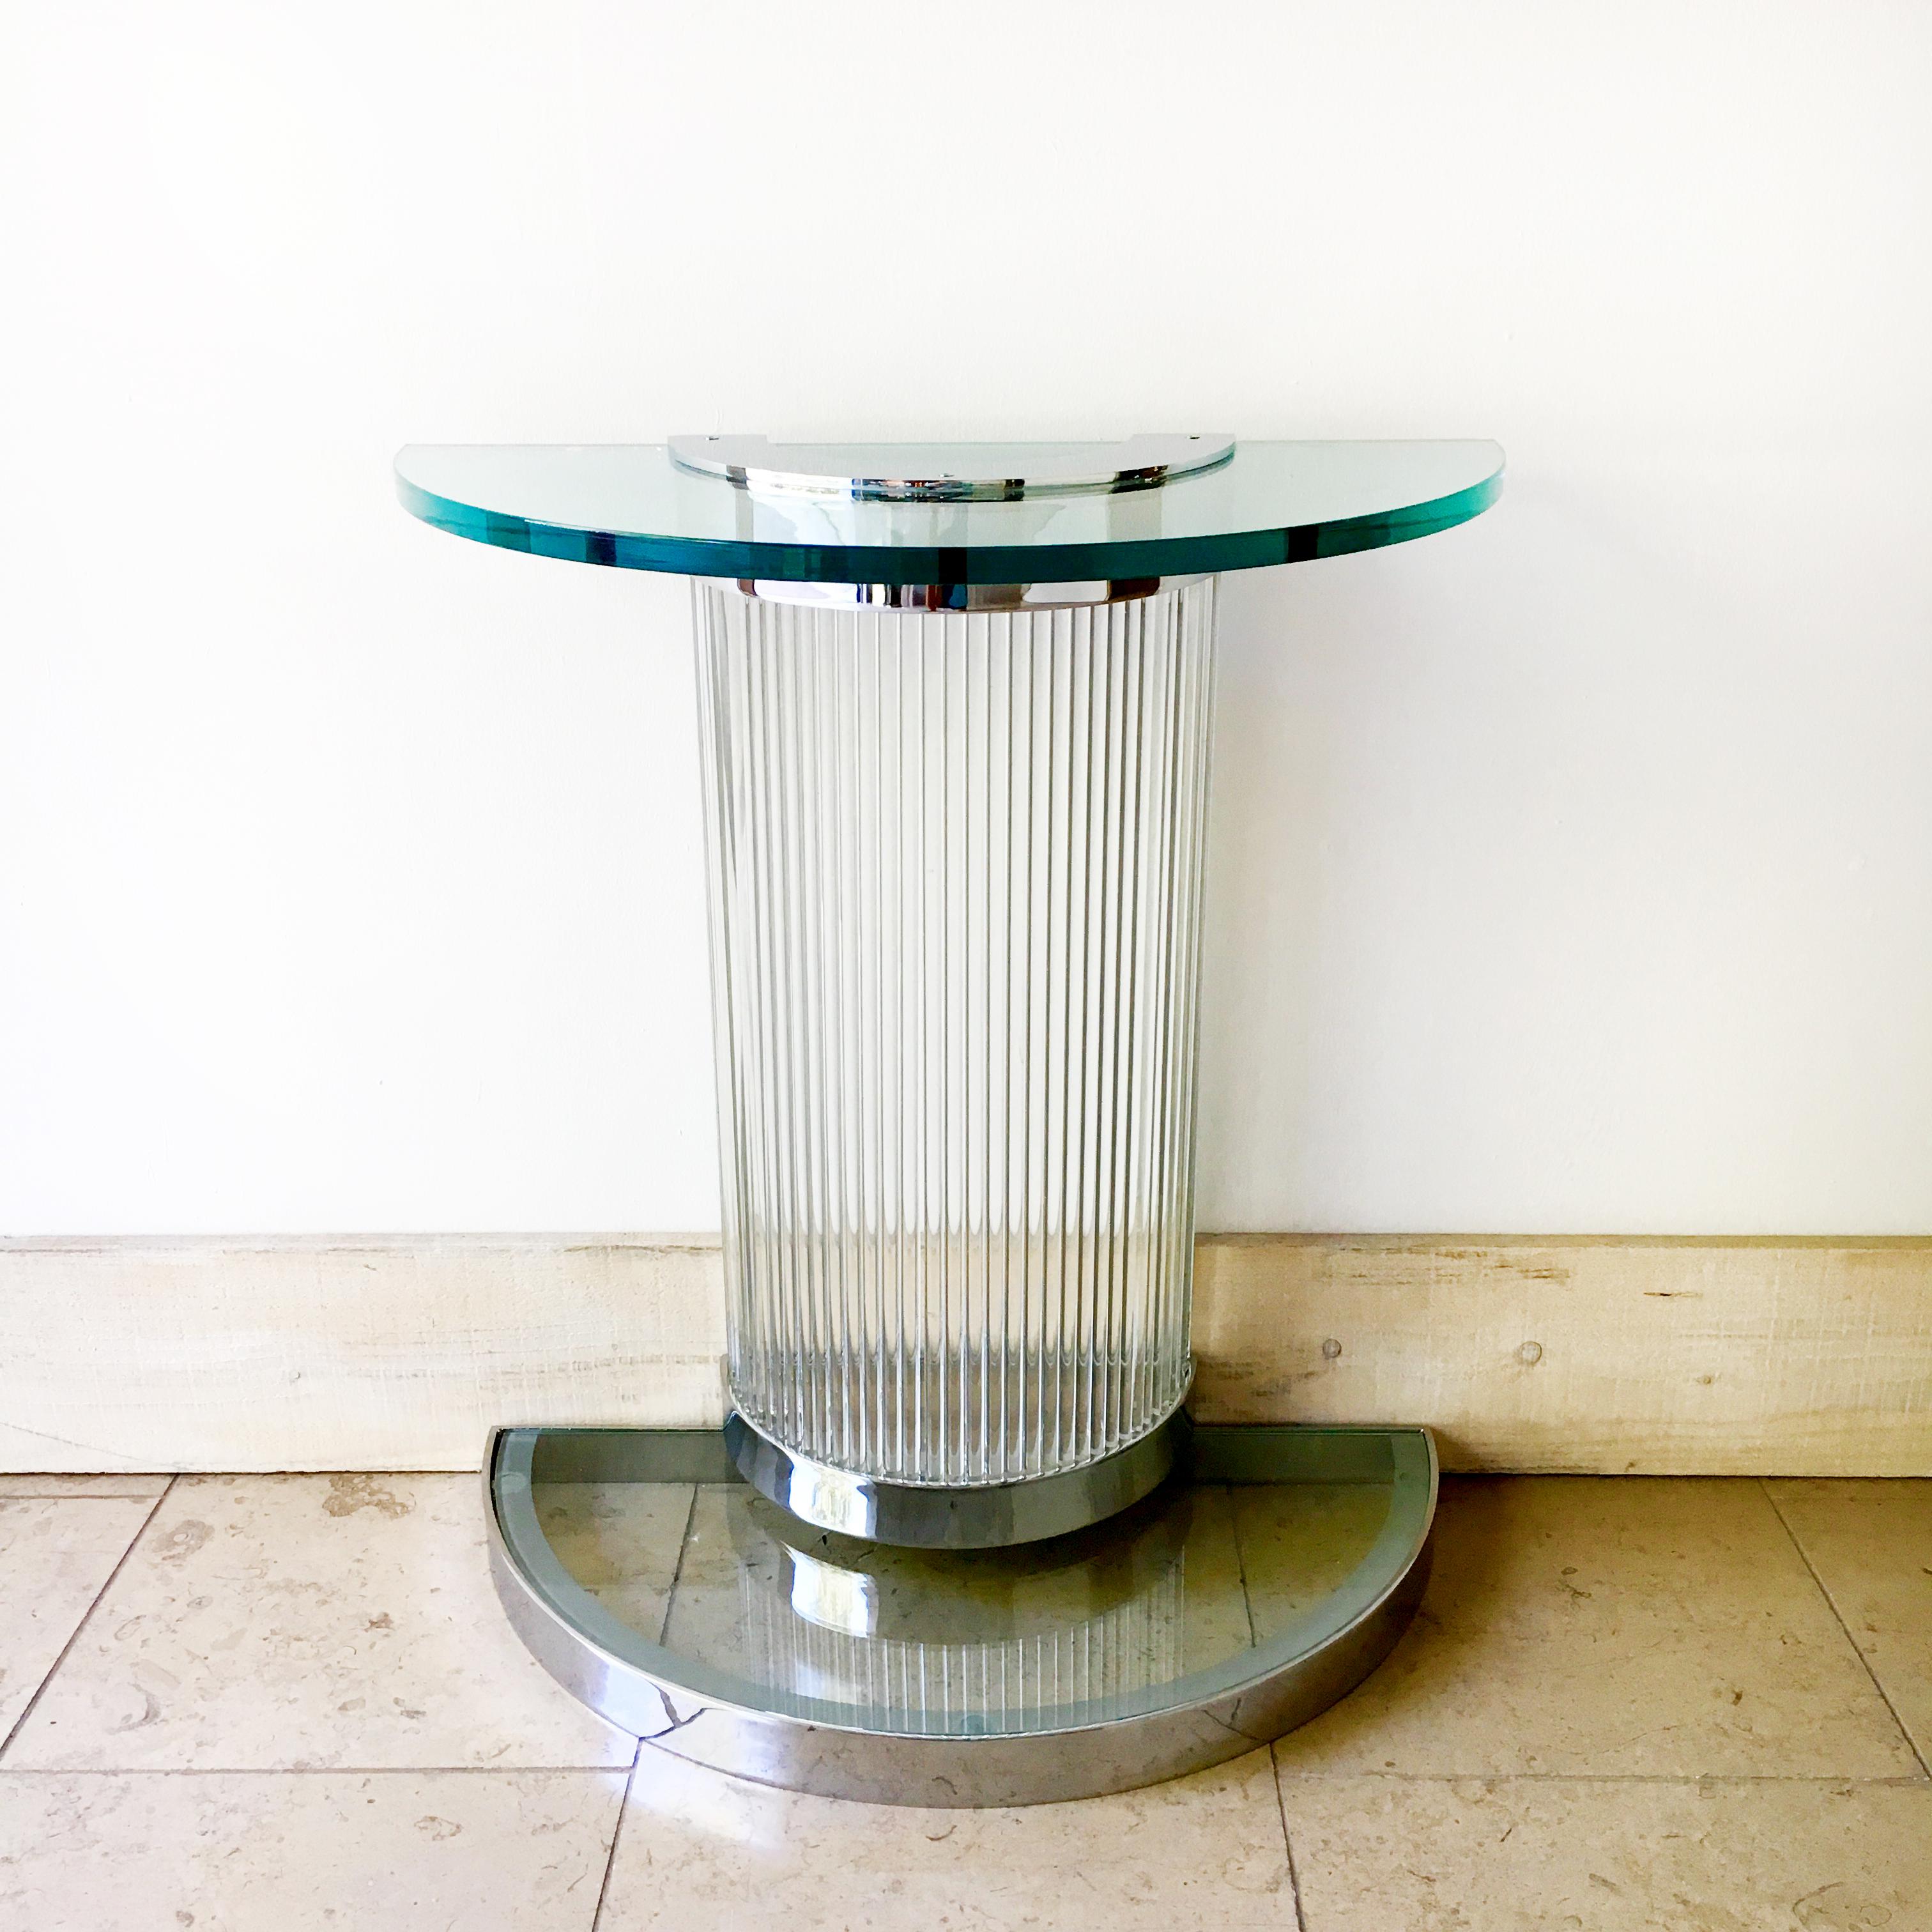 A pair of Art Deco influenced chromed steel and glass rod demilune console tables in the manner of Donald Deskey, 1960s
Could be wired to be lit internally for additional drama!
Require wall mounting for stability
Sold as seen with original 20mm